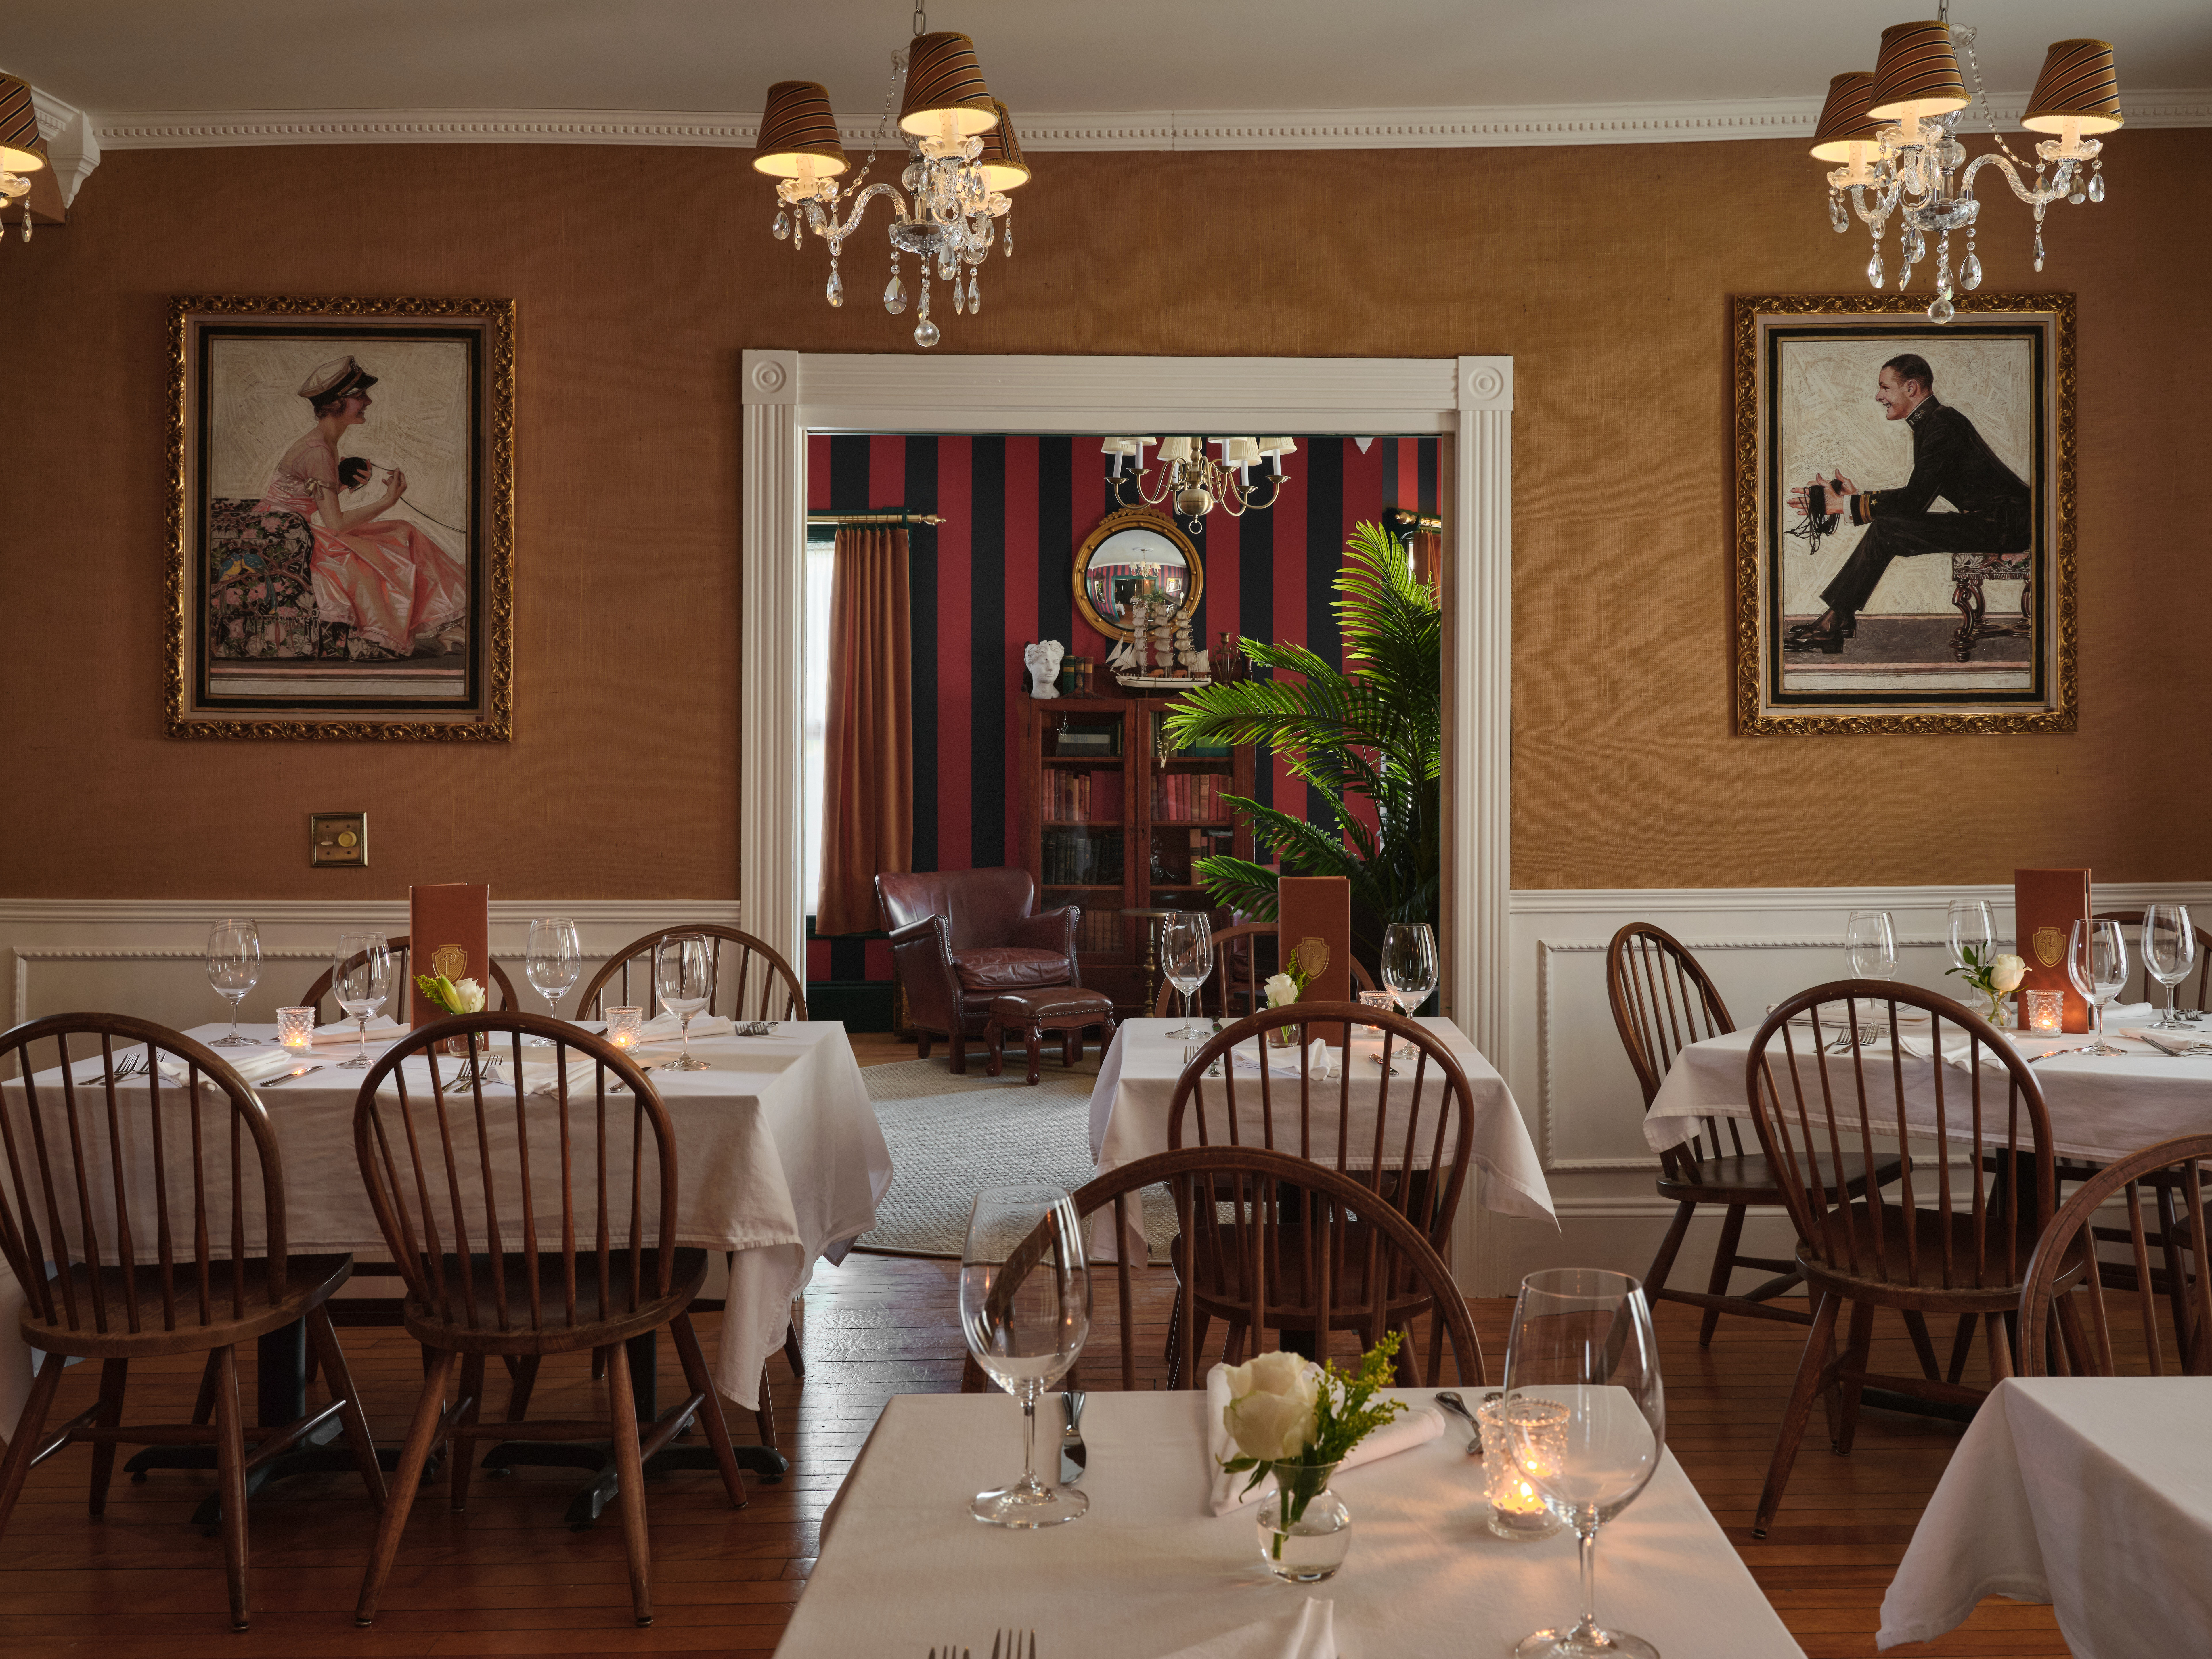 The dining room of our Castine restaurant